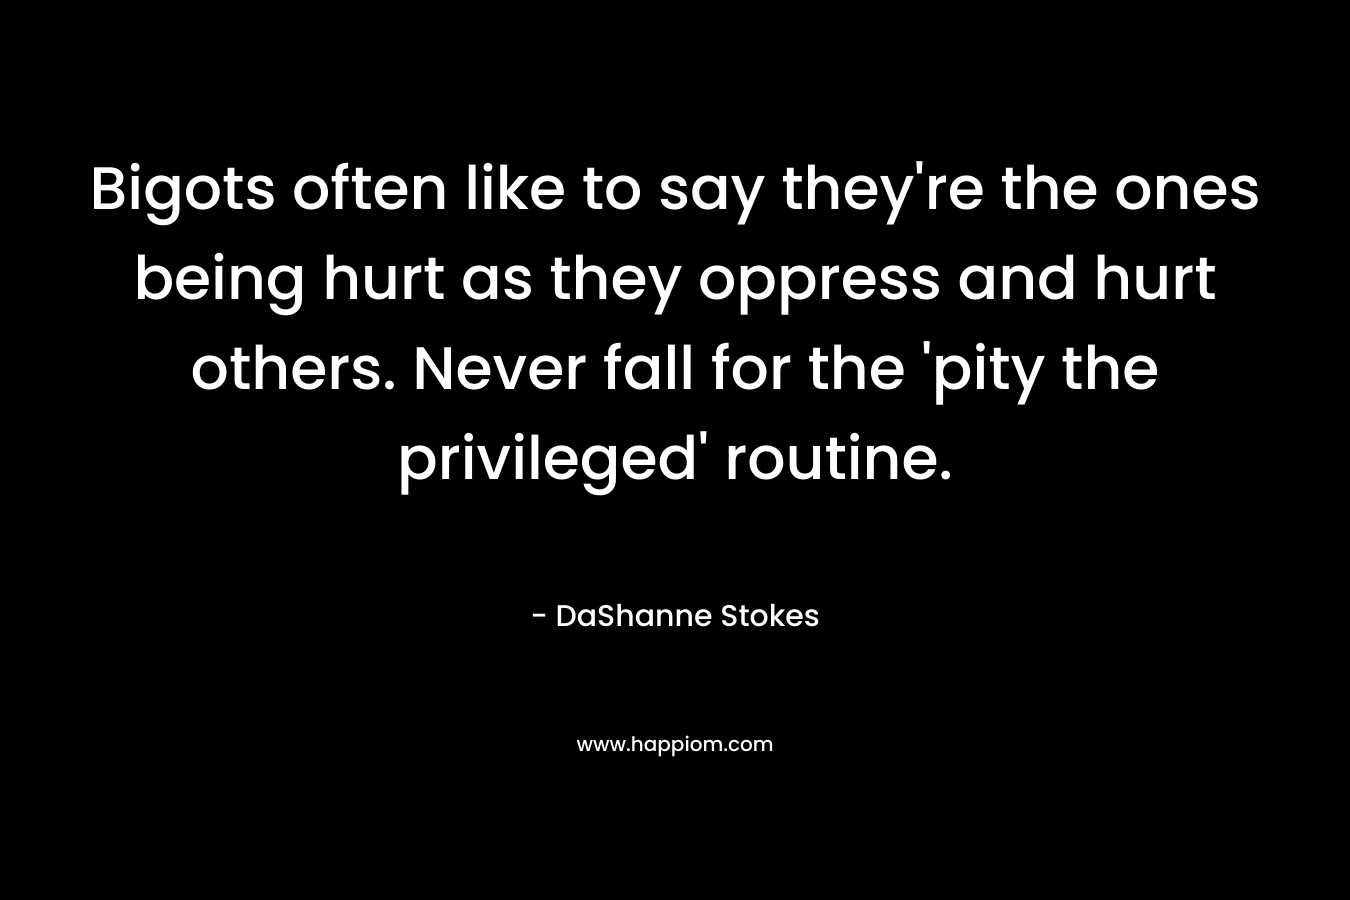 Bigots often like to say they’re the ones being hurt as they oppress and hurt others. Never fall for the ‘pity the privileged’ routine. – DaShanne Stokes